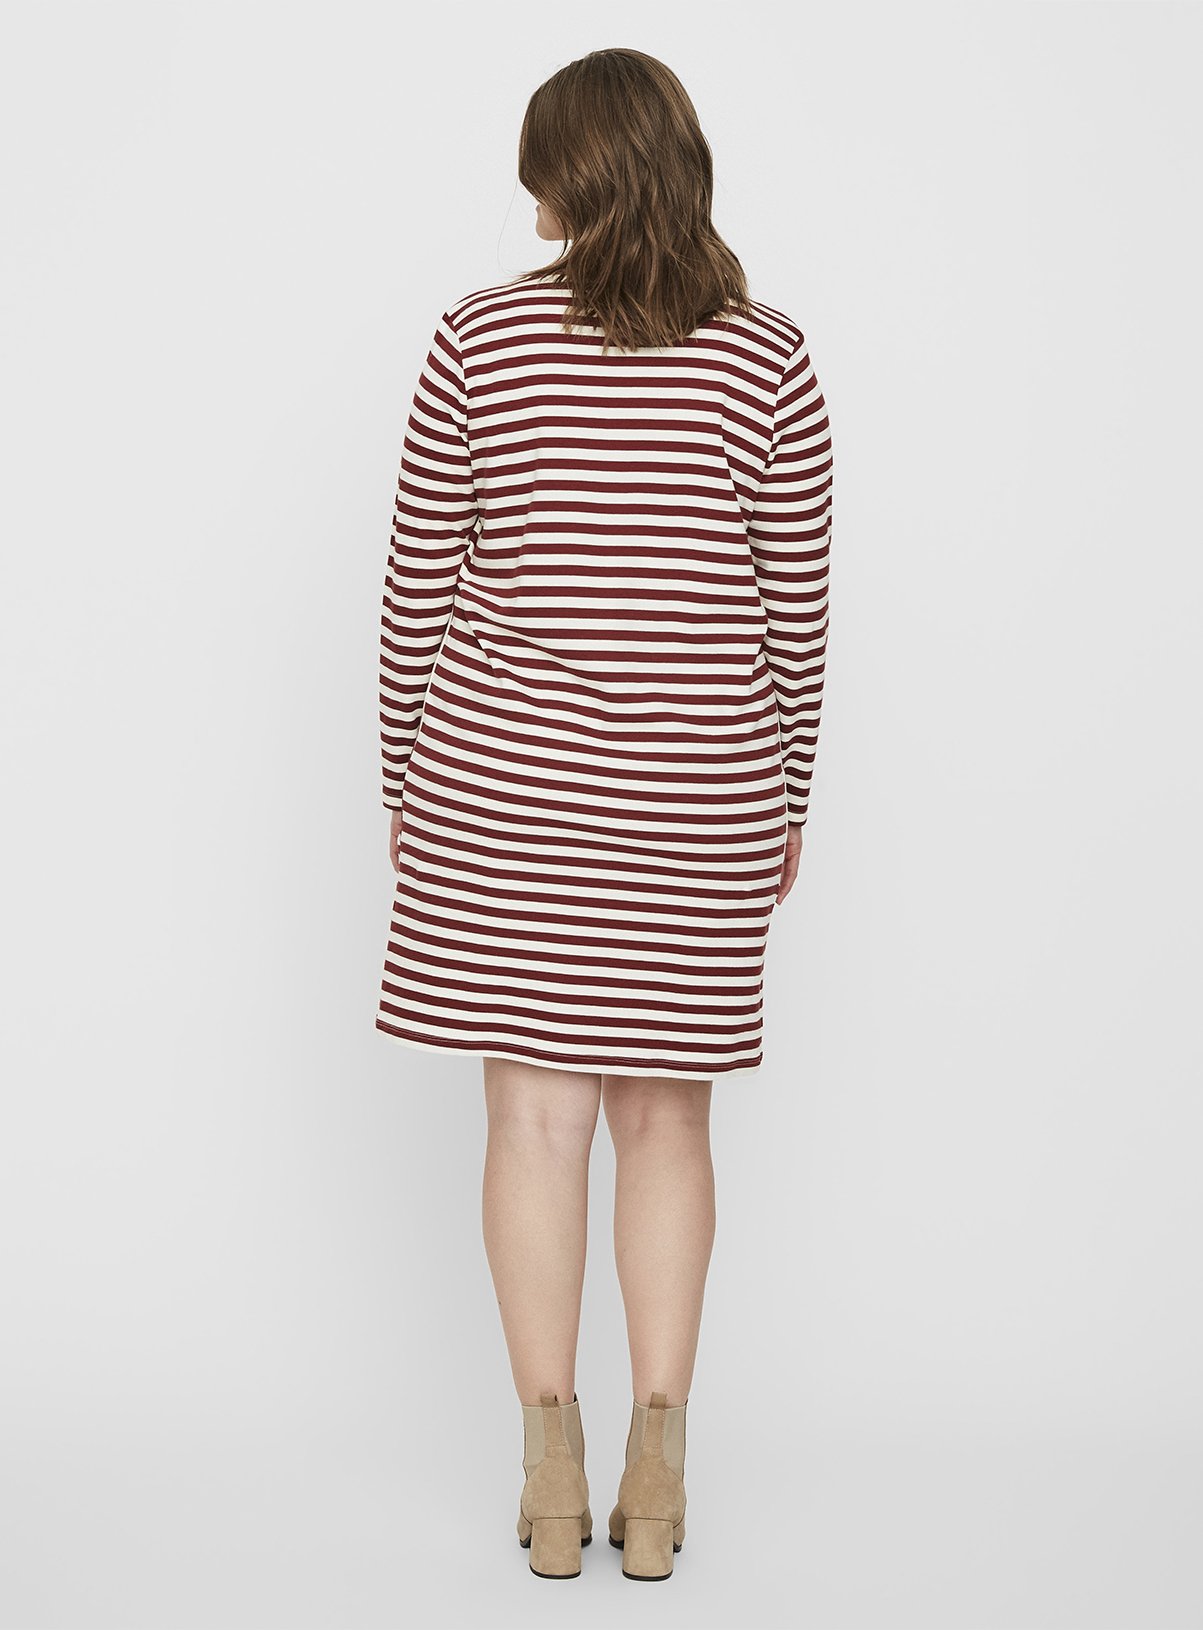 Red & White Stripe Long Sleeve Dress Review